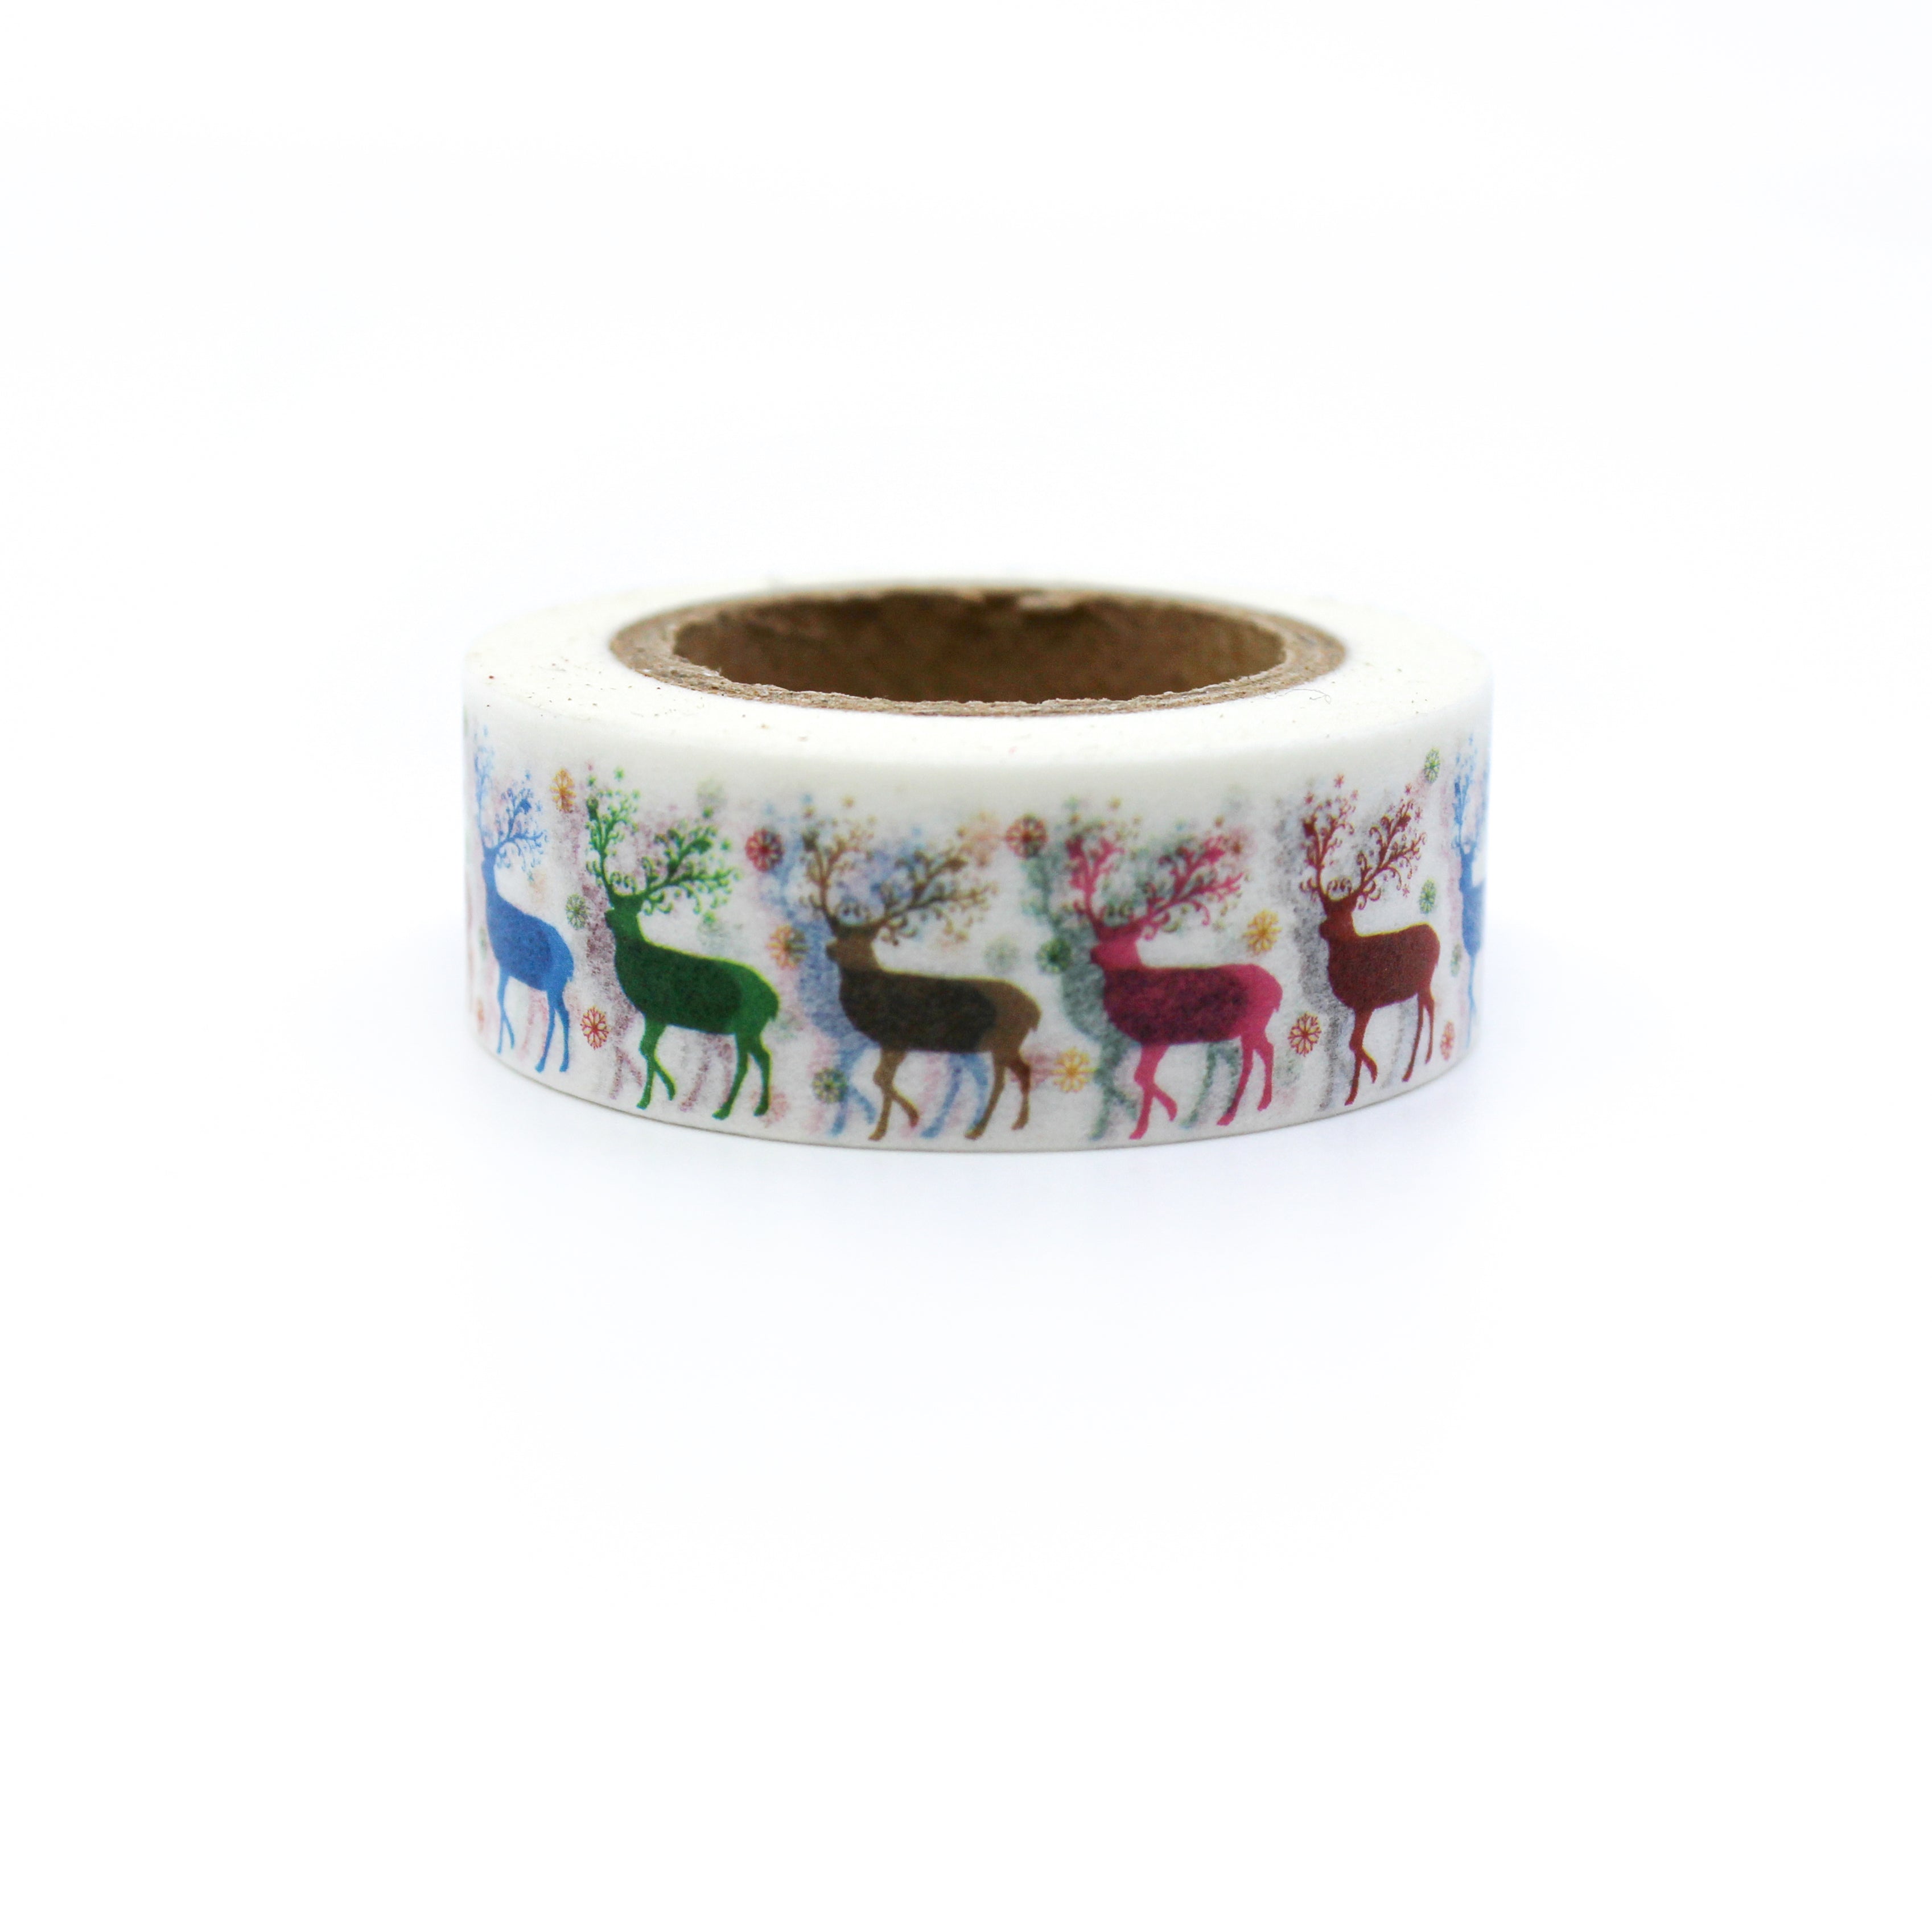 This is a colorful reindeer standing up with snow flakes washi tapes from BBB Supplies Craft Shop